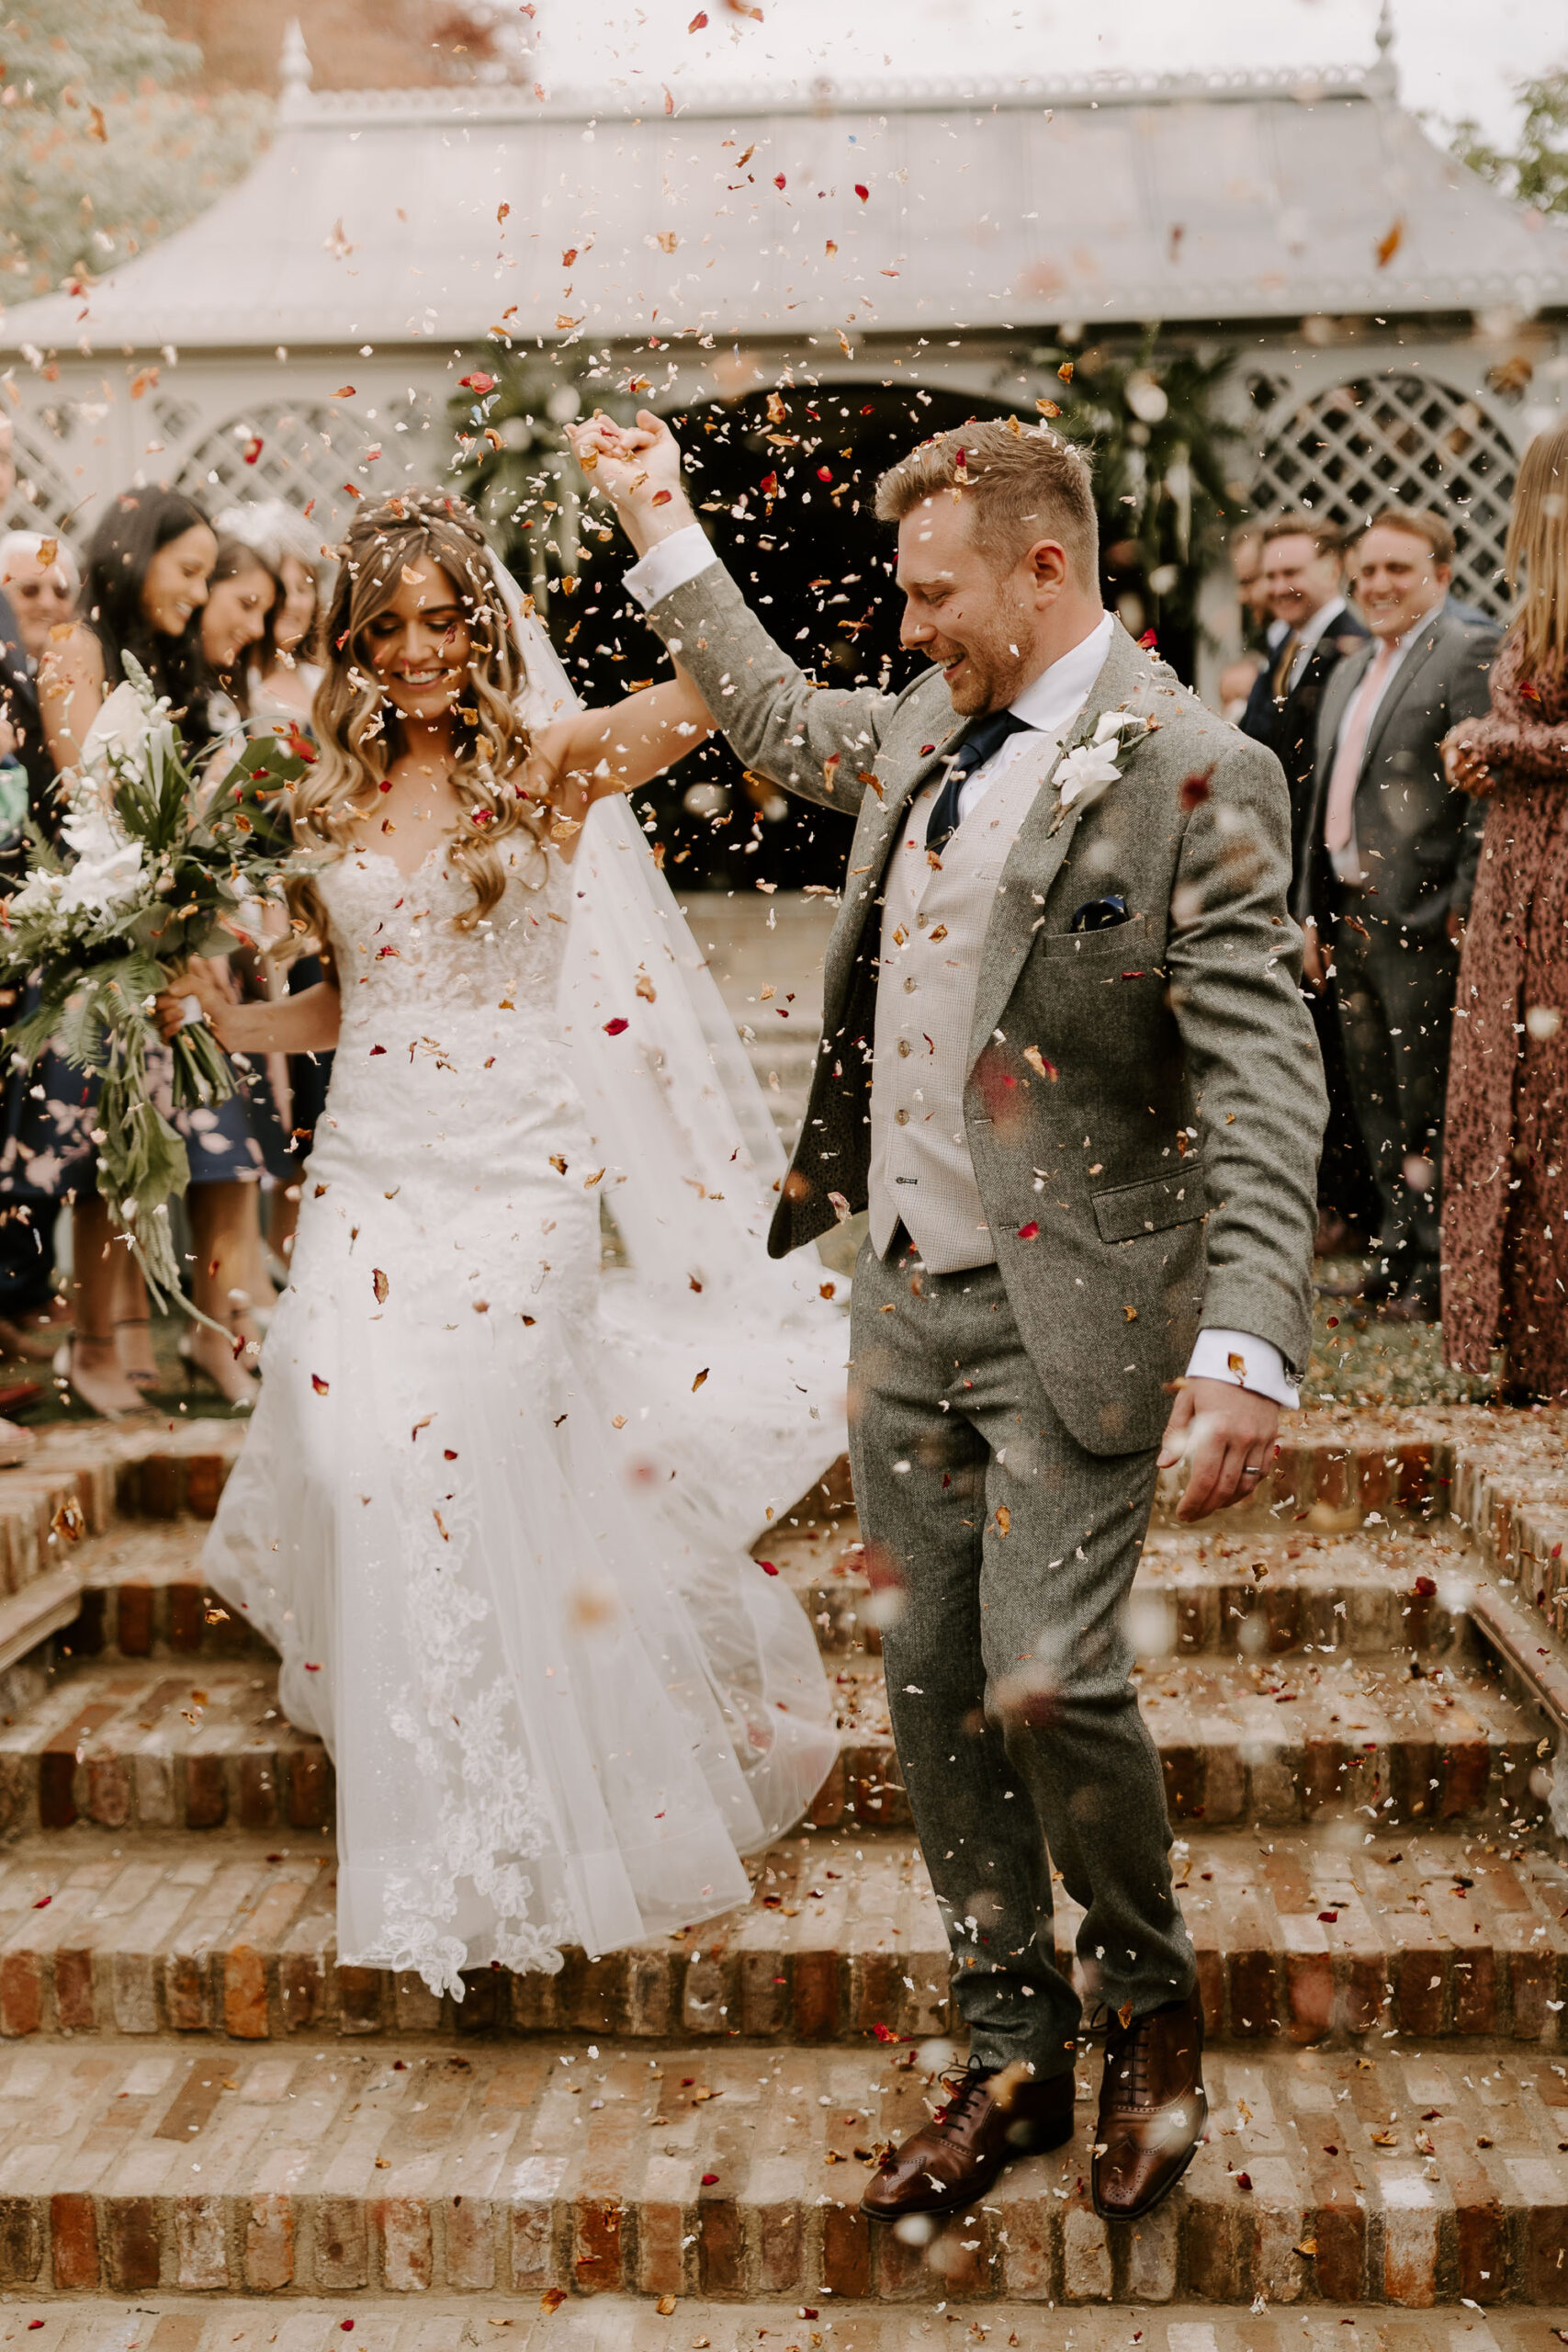 Sarah and Chris's stunning wedding at Port Lympne was beautiful, elegant, and incredibly fun, which included an AMAZING Safari halfway through the day.